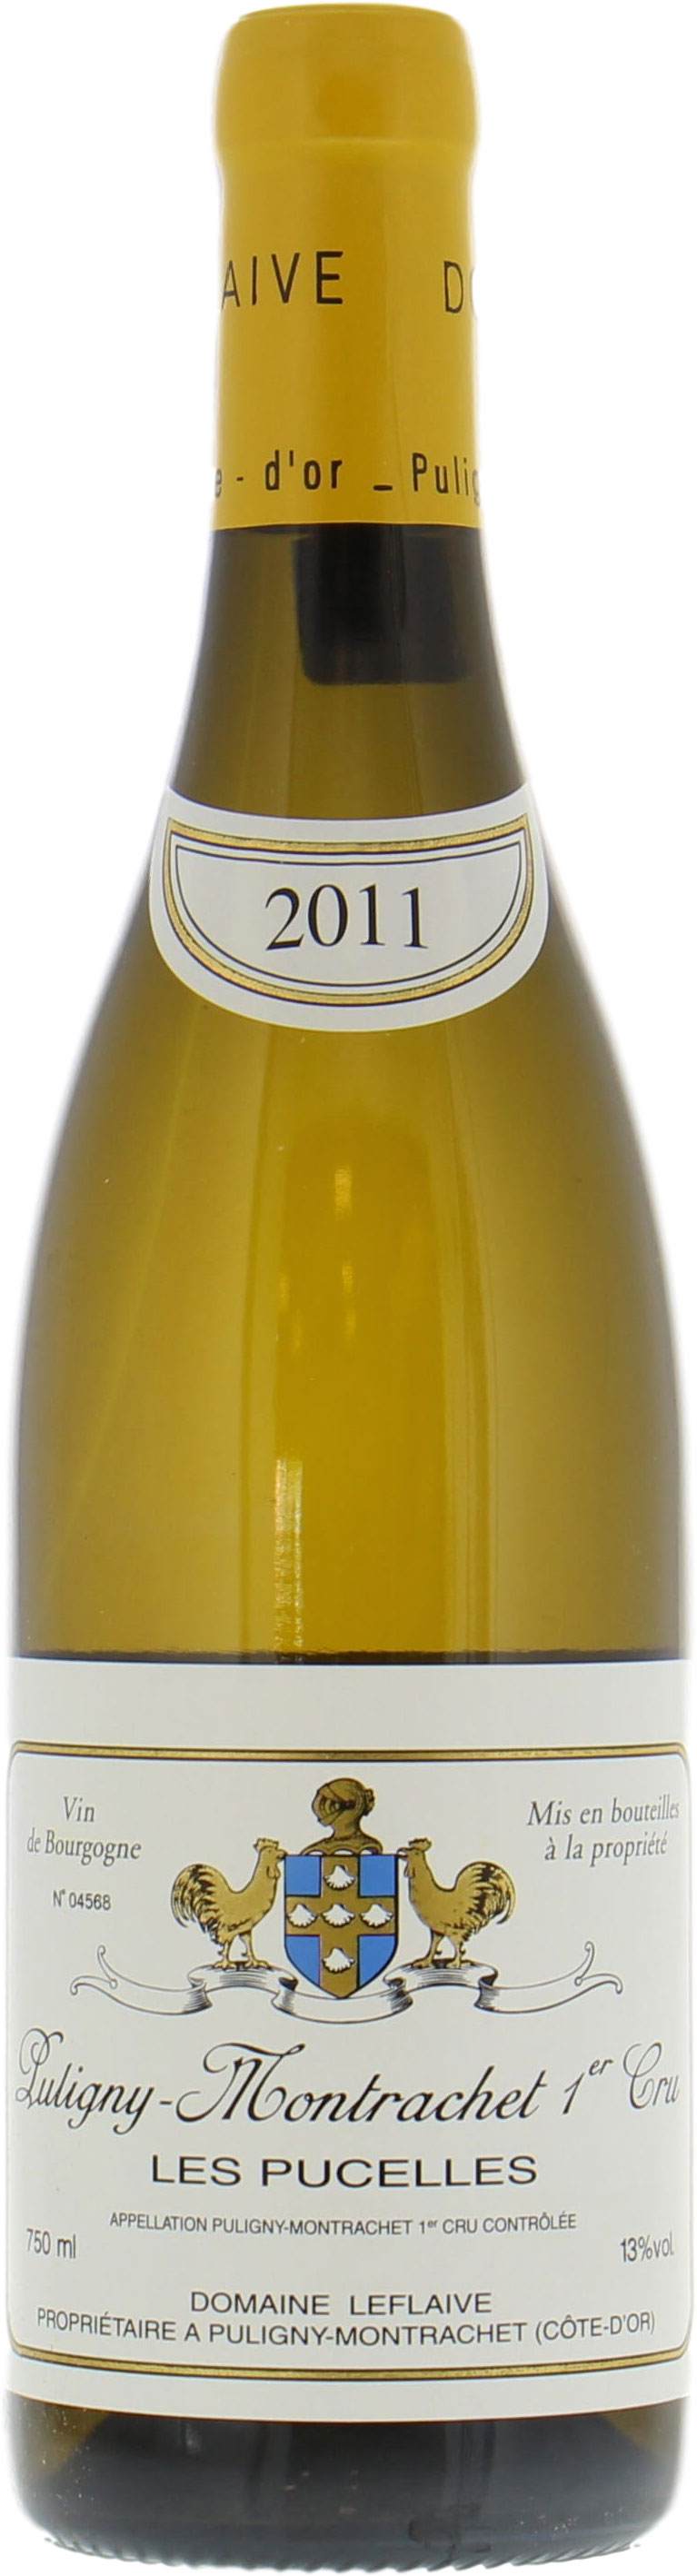 Domaine Leflaive - Puligny Montrachet Pucelles 2011 From Original Wooden Case